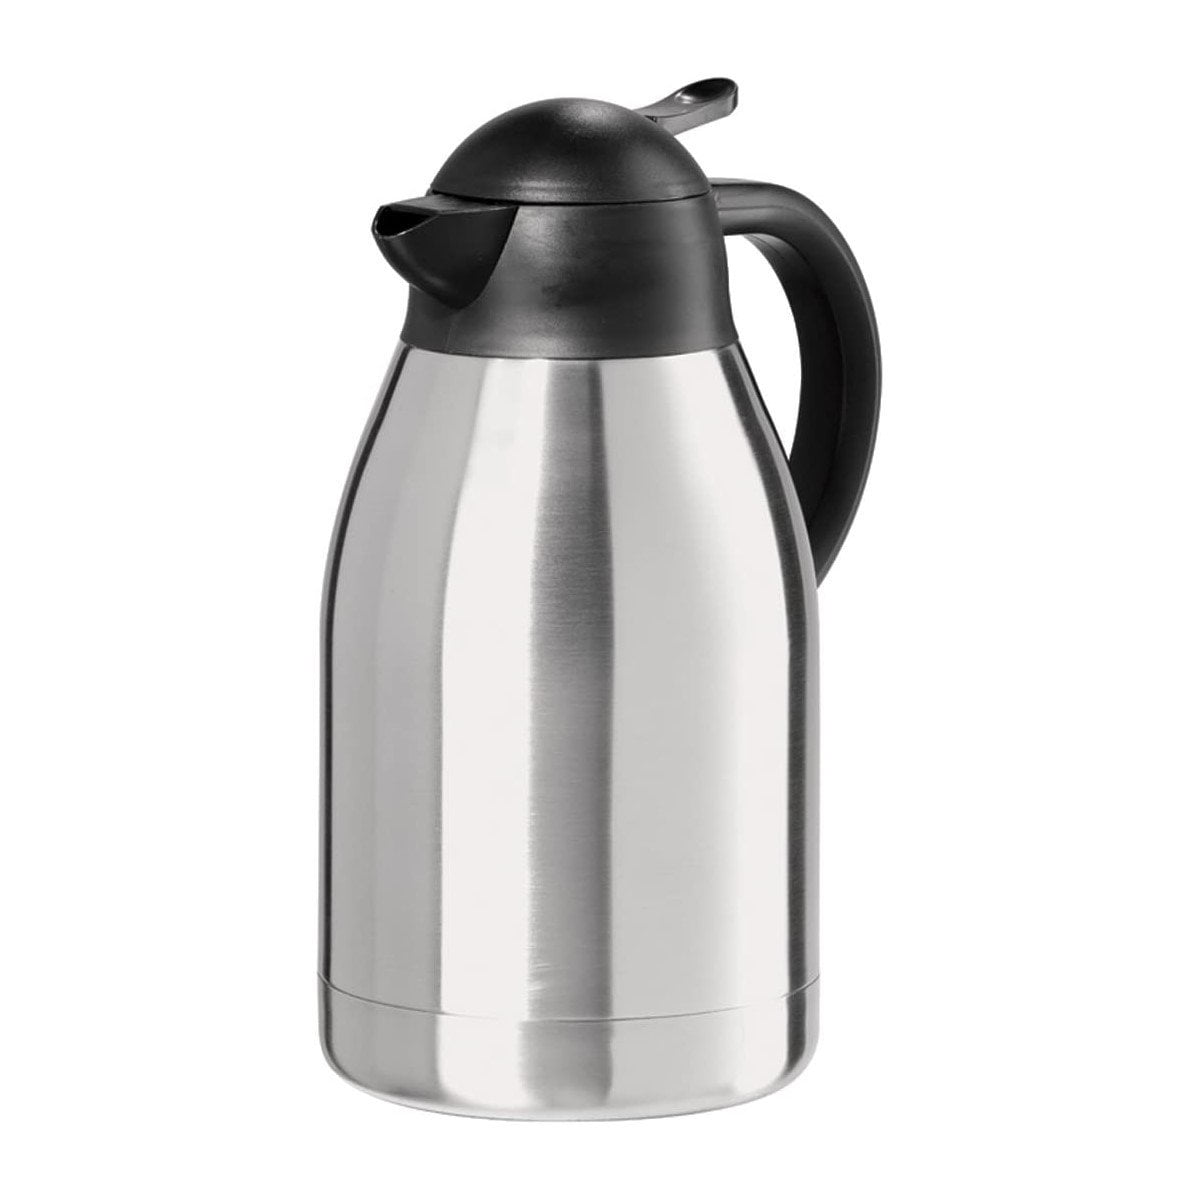 Stainless Steel Coffee Maker with 2 Liter Thermal Carafe – Omcan